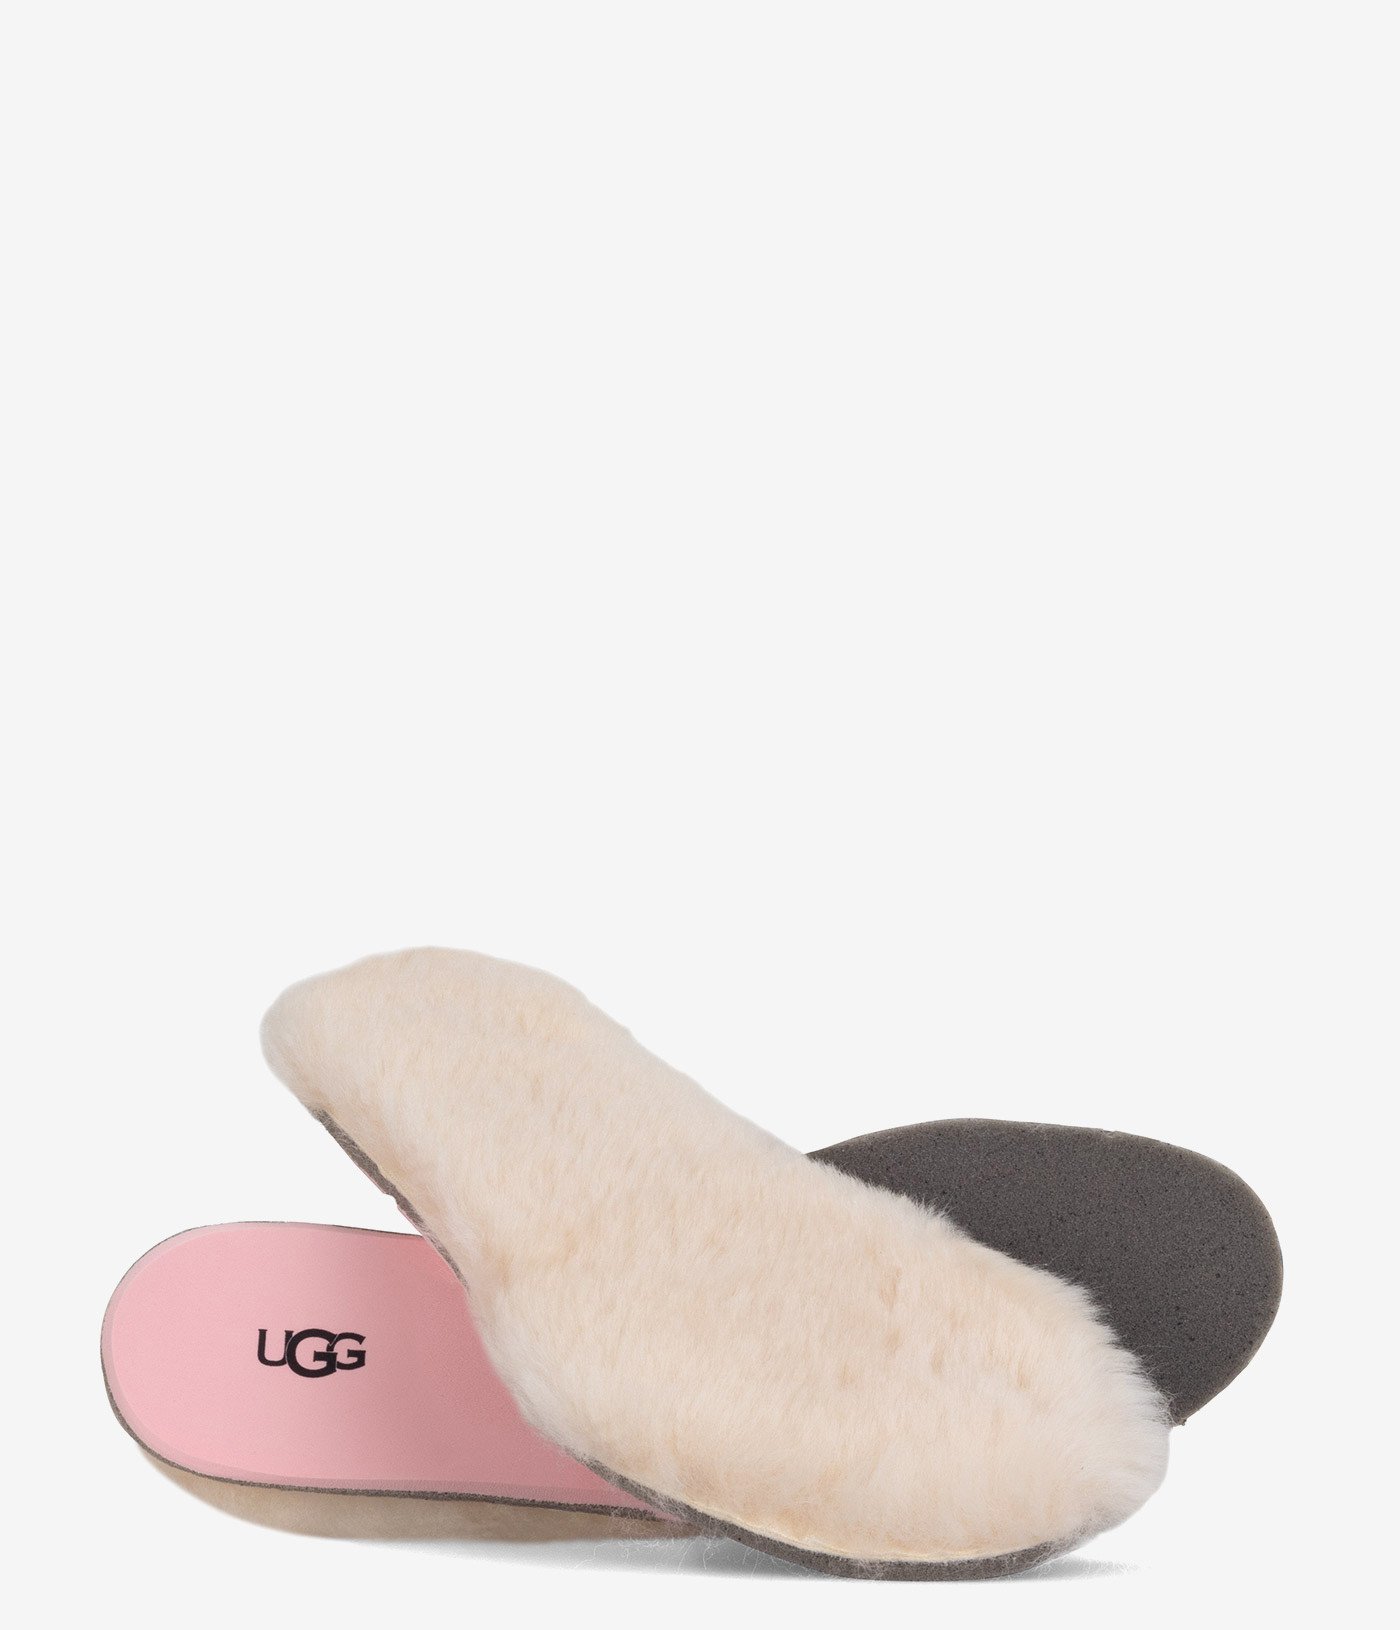 UGG Sheepskin Replacement Insoles for Women